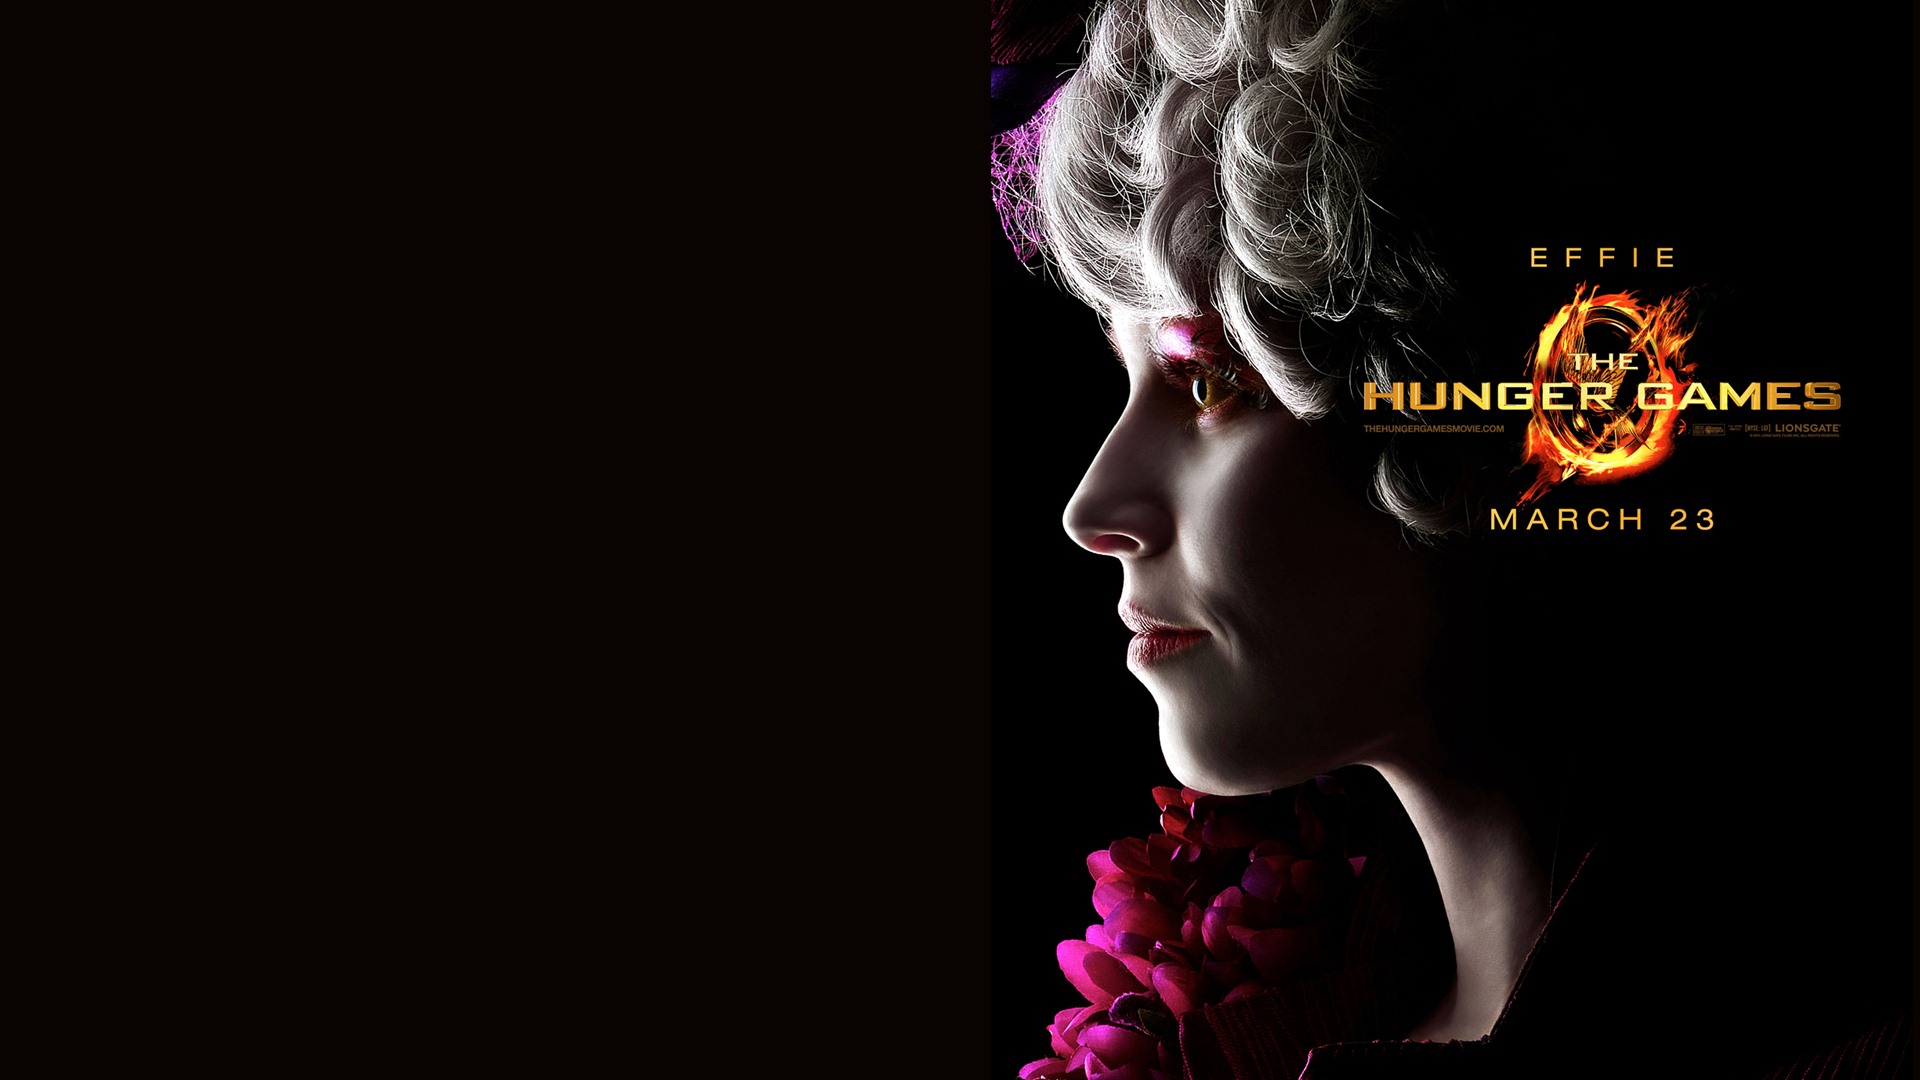 The Hunger Games HD wallpapers #10 - 1920x1080